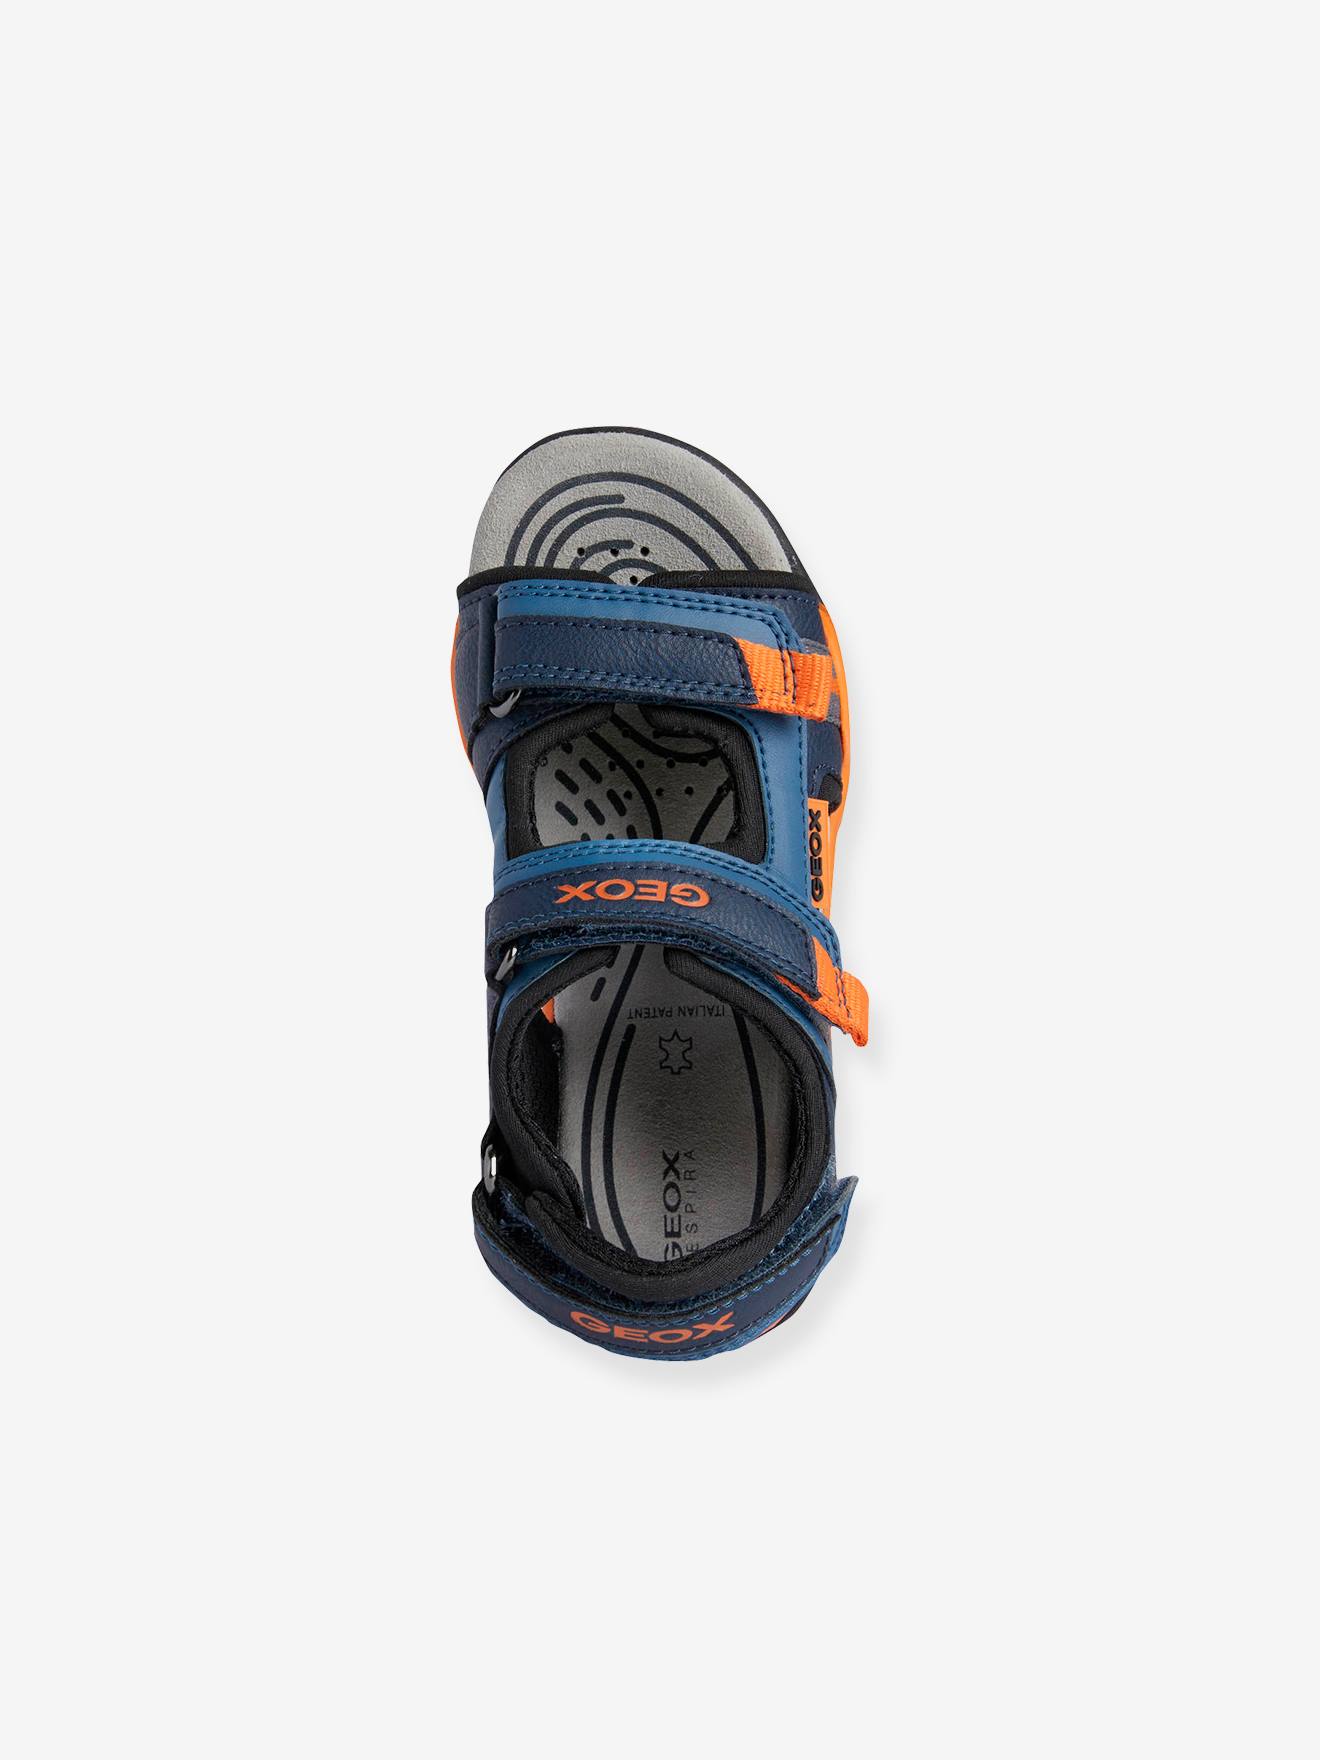 Sandals for Boys, J. Borealis blue B.A medium - by GEOX® solid, Shoes